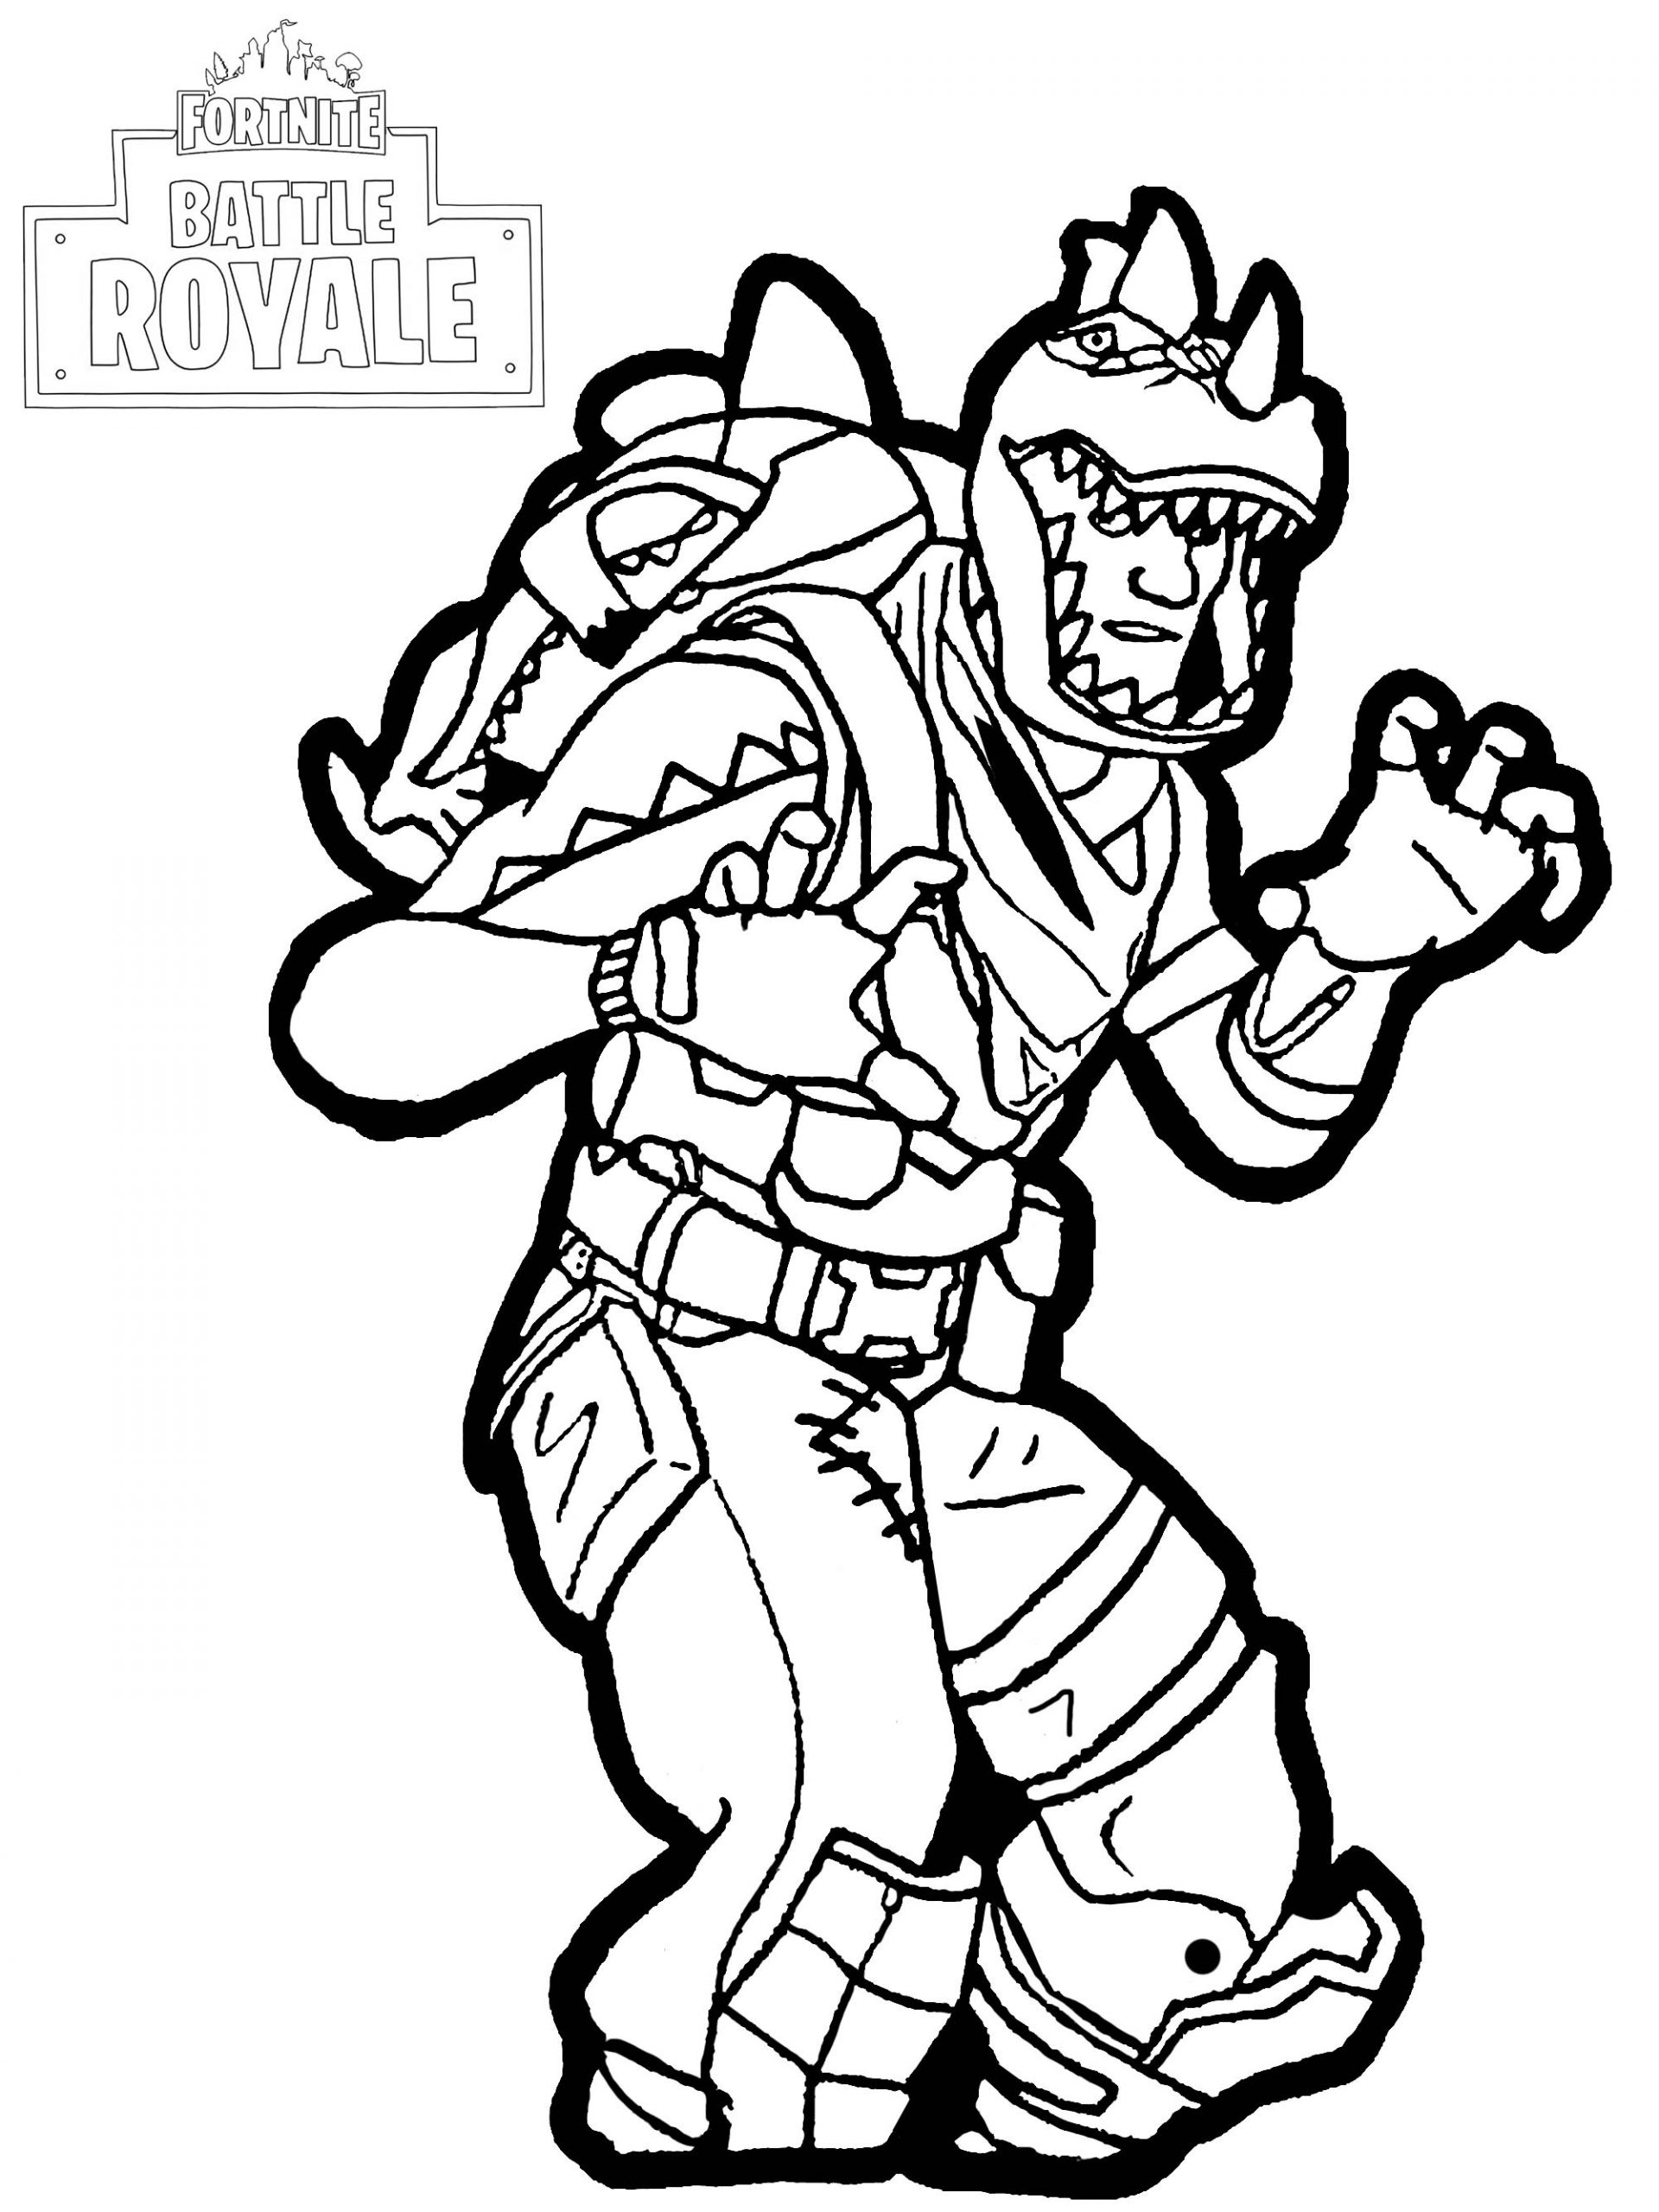 Fortnite Skins Coloring Pages - AeroGrafiaOnline